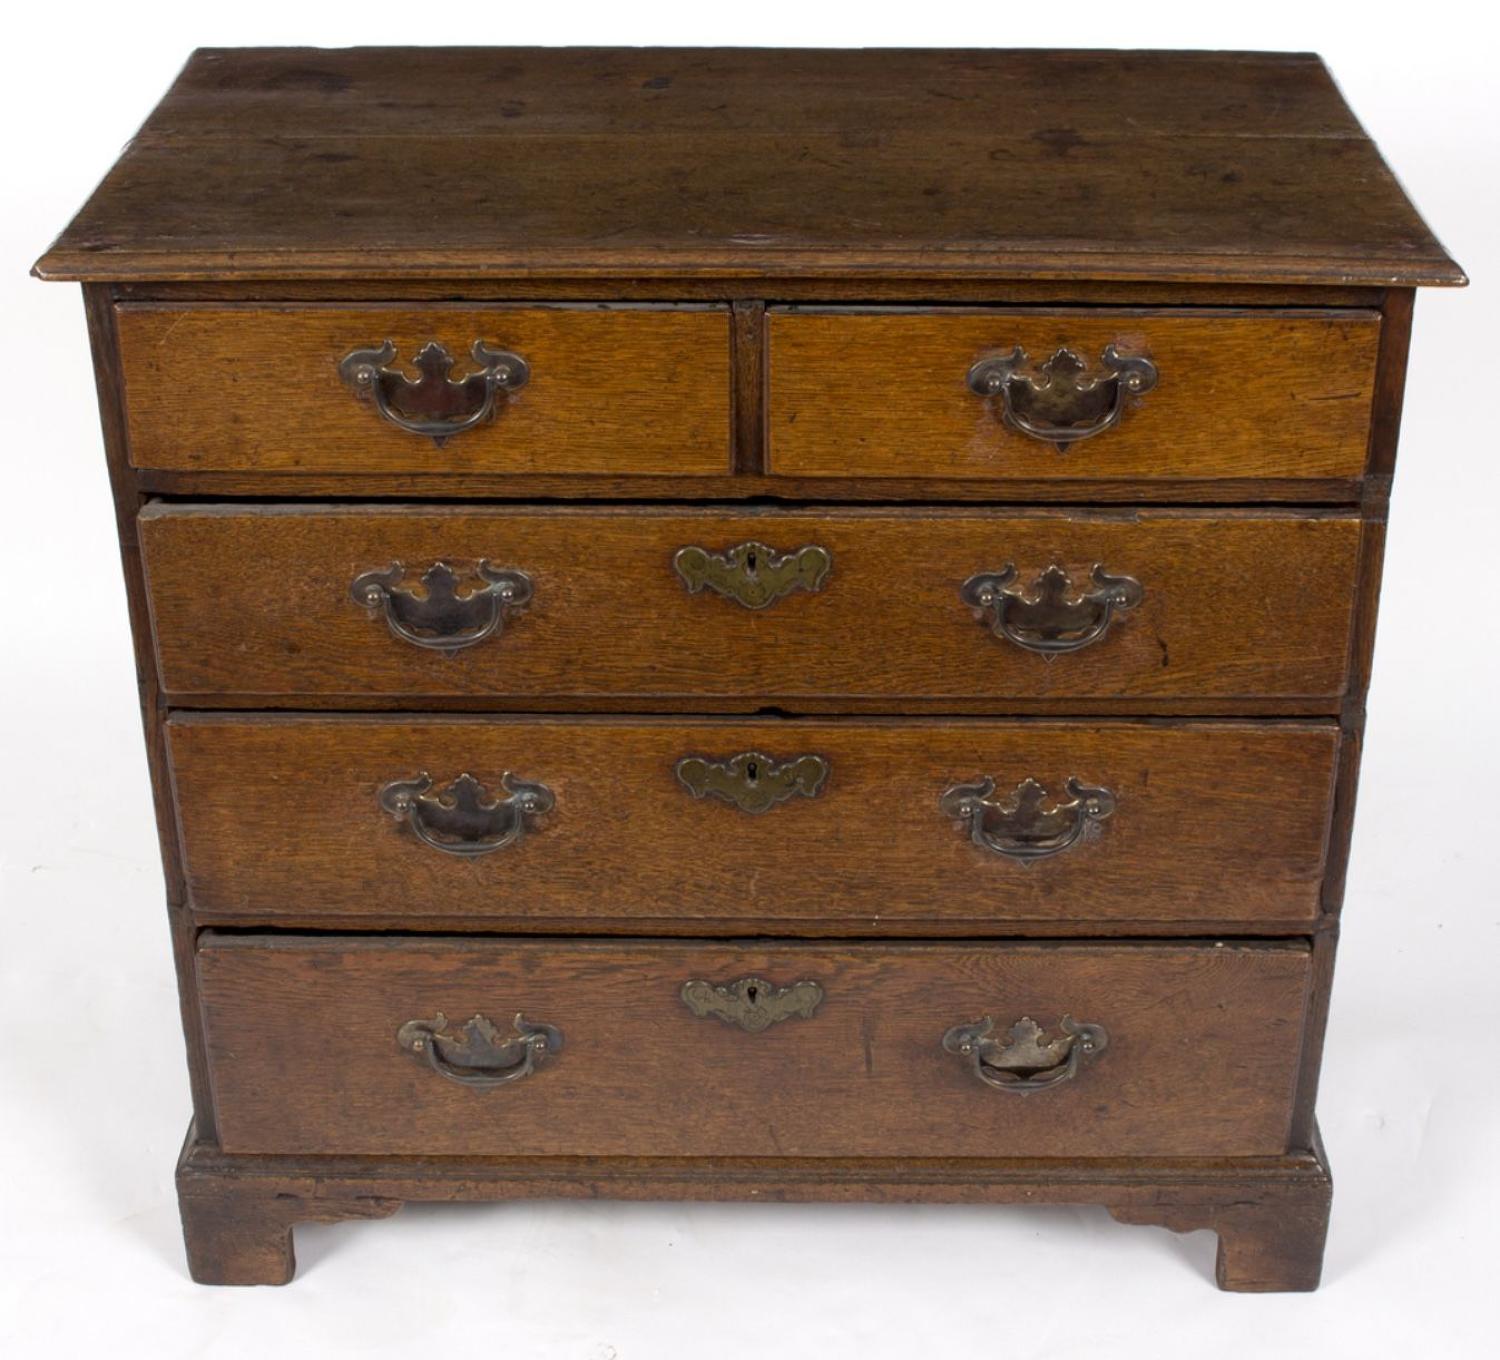 18th century oak chest of drawers of small proportions